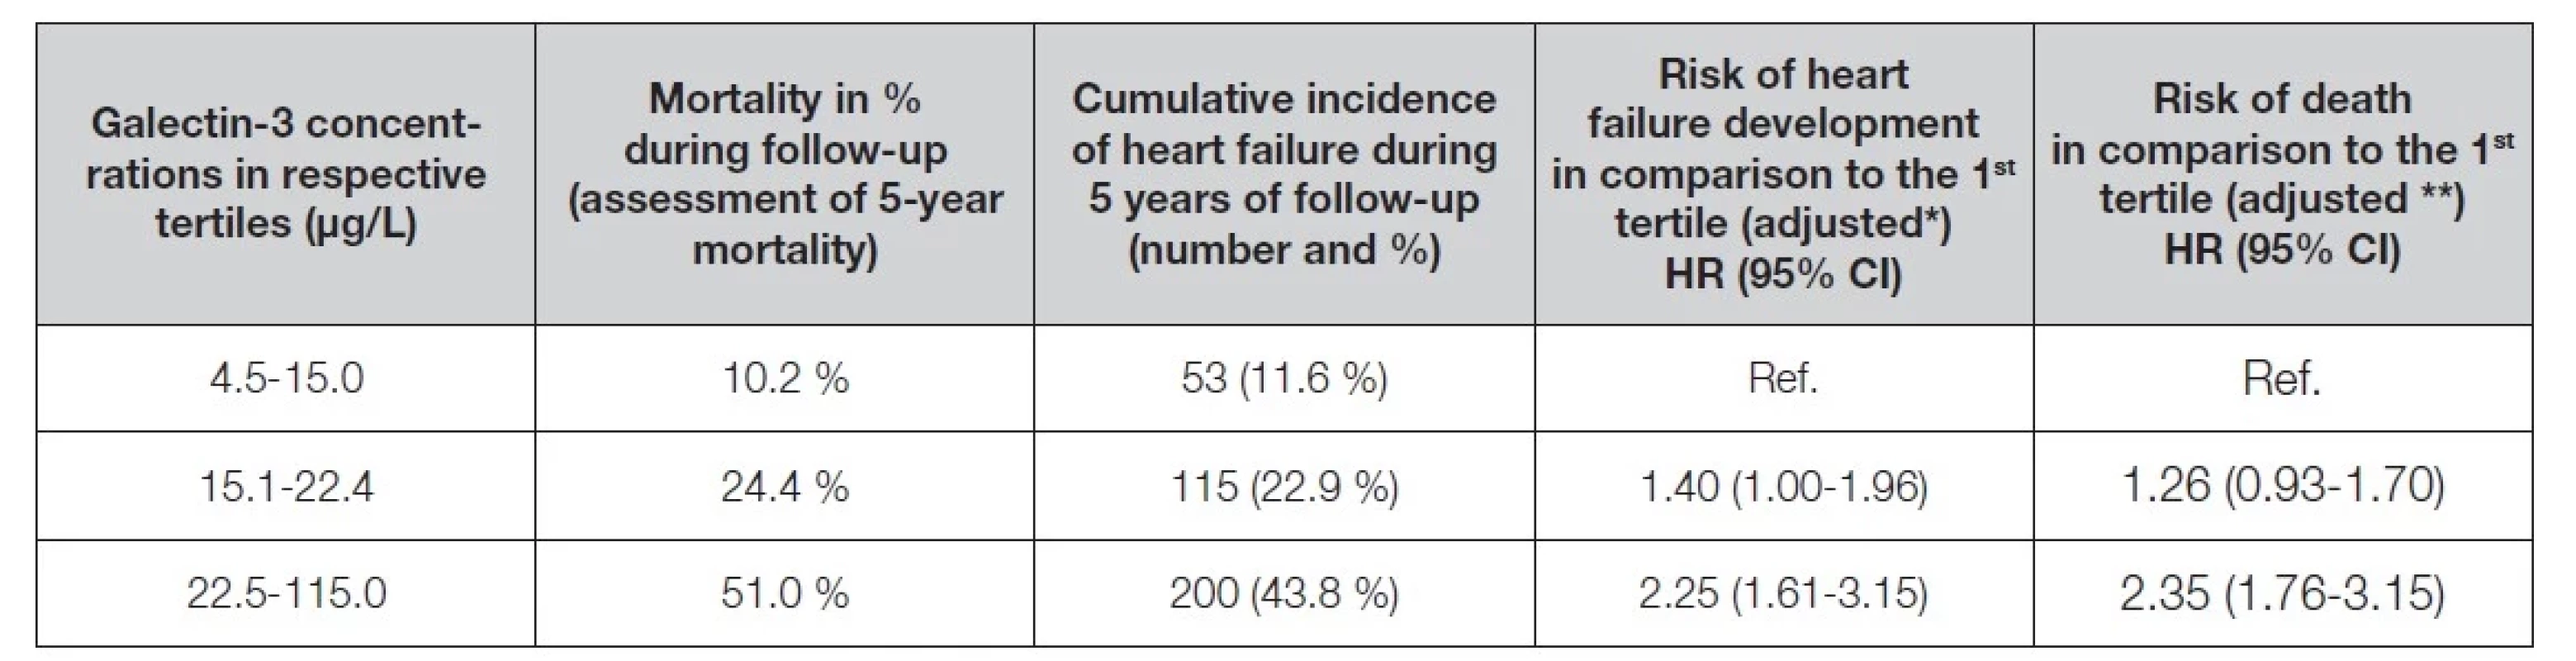 Relationship between galectin-3 concentrations (tertiles of concentration) and mortality or risk of heart failure
development [18]